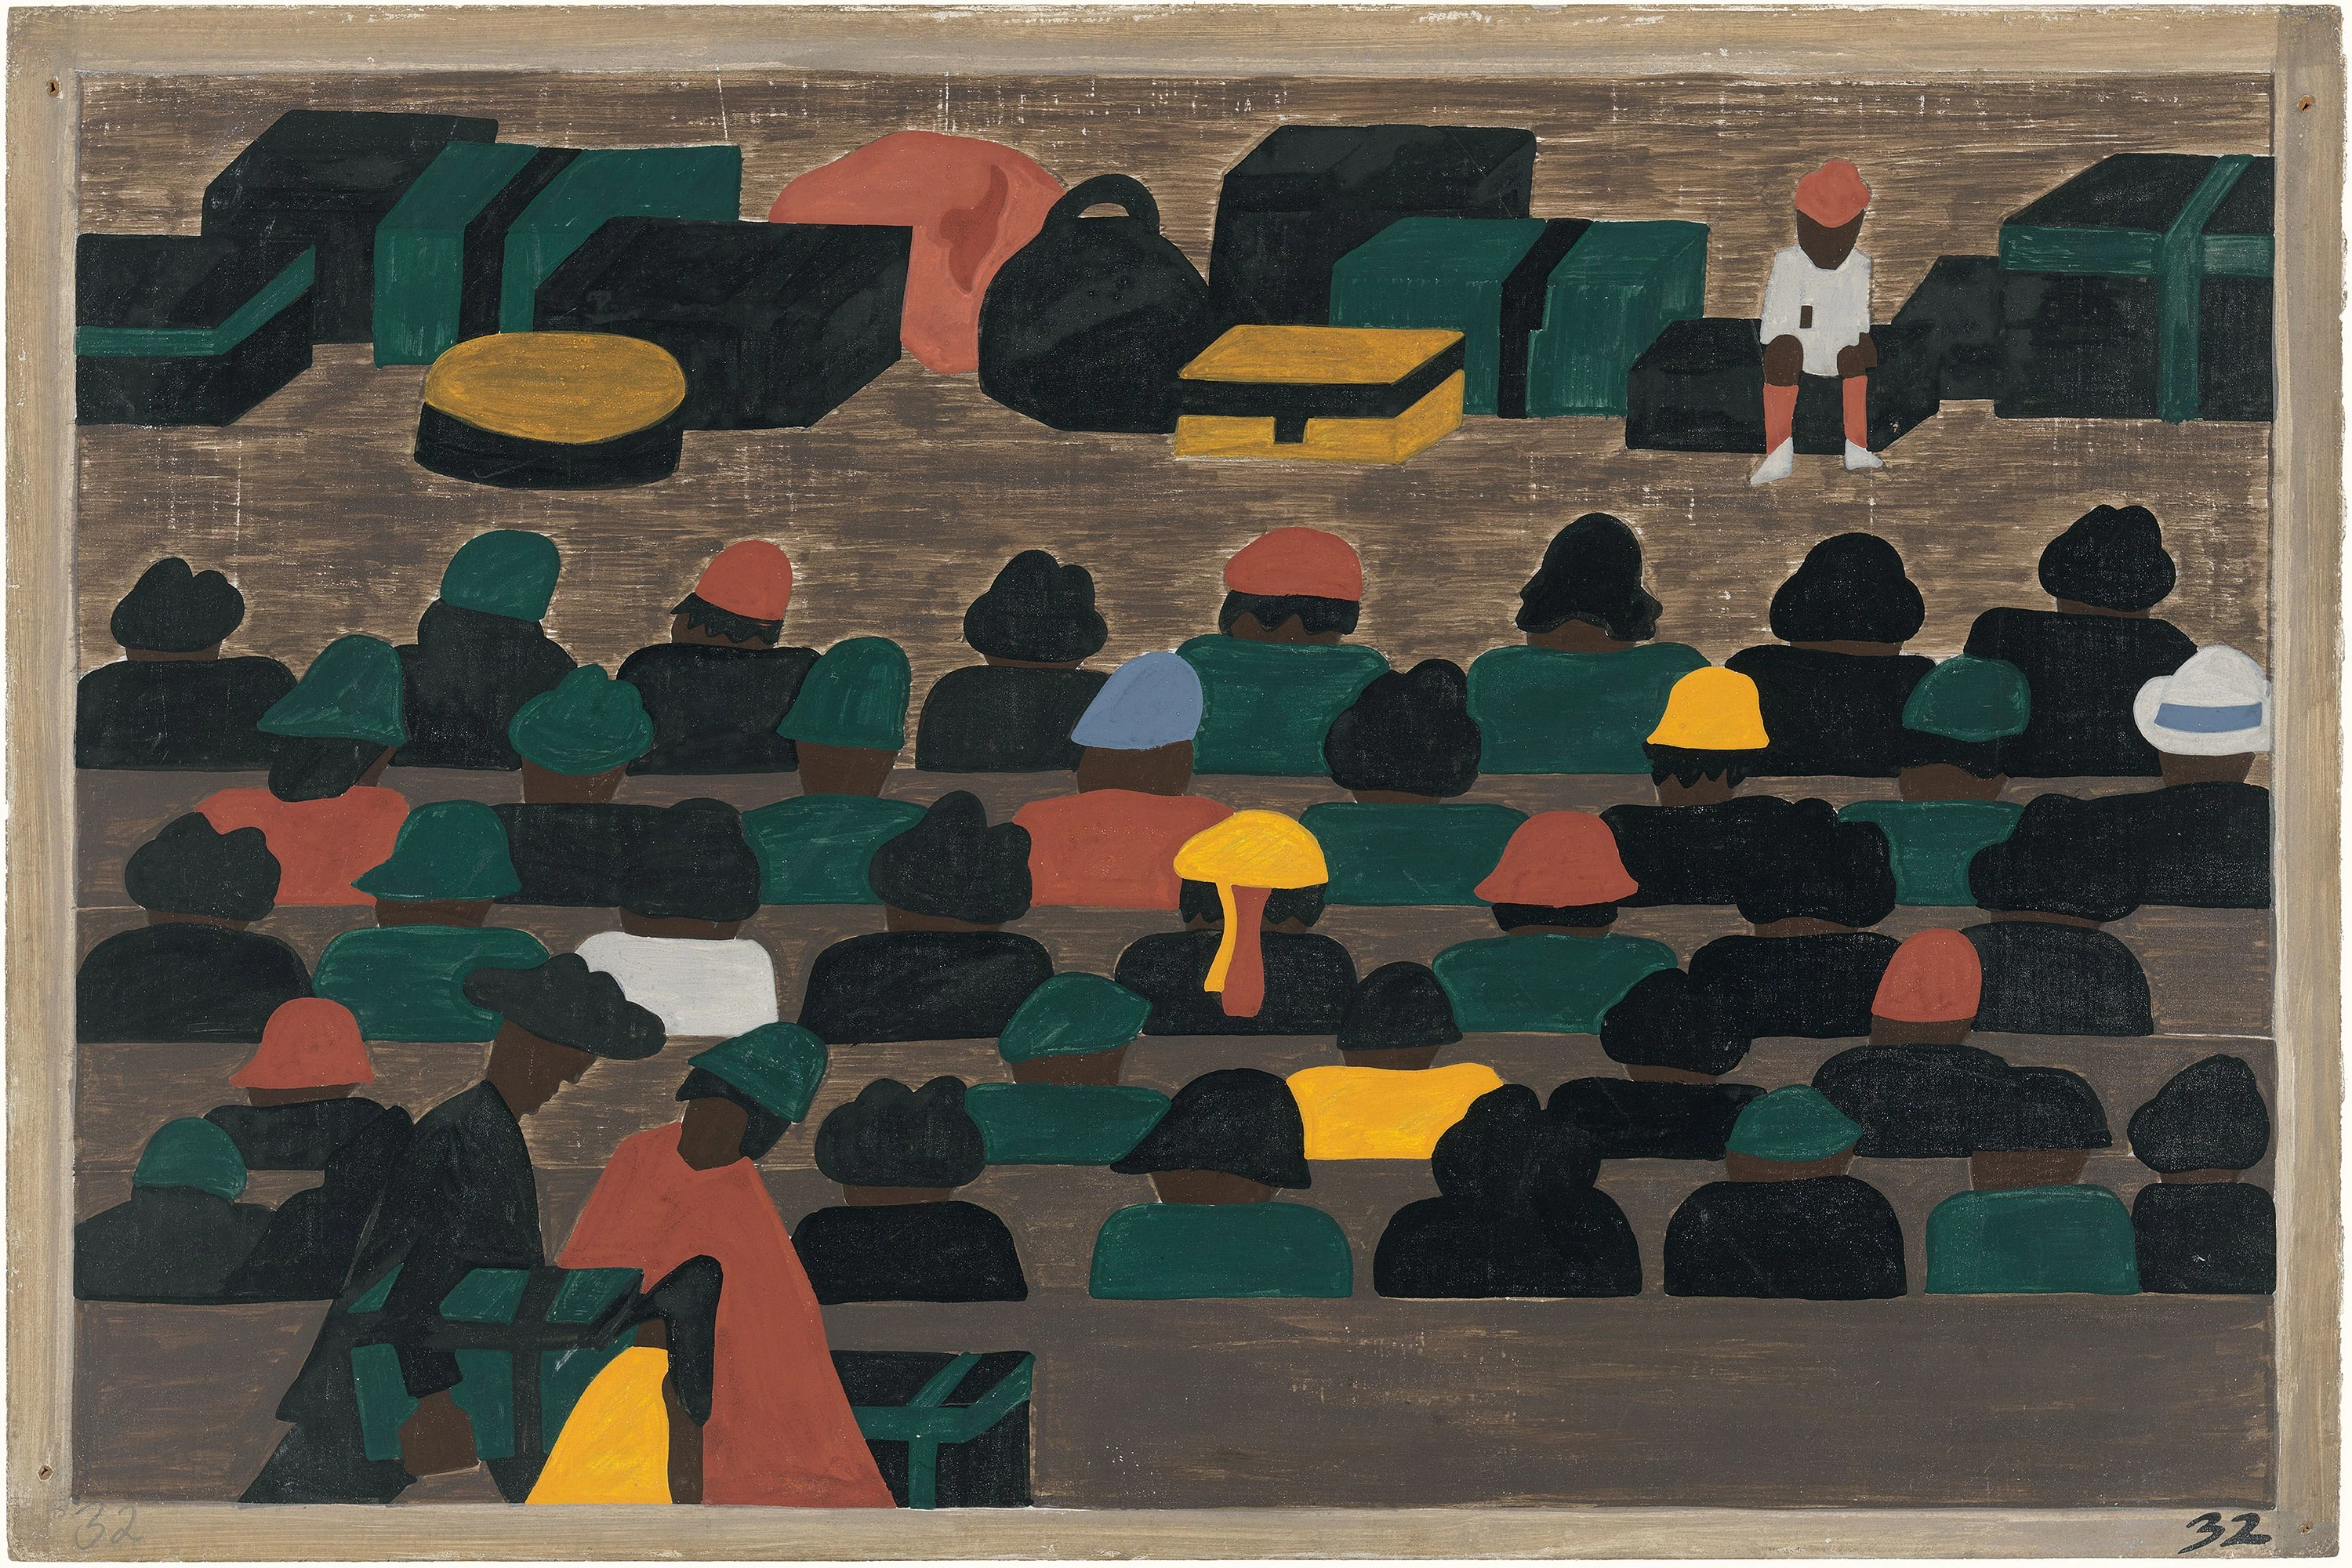 Migration Series No.32: The railroad stations in the South were crowded with northbound travelers, Jacob Lawrence